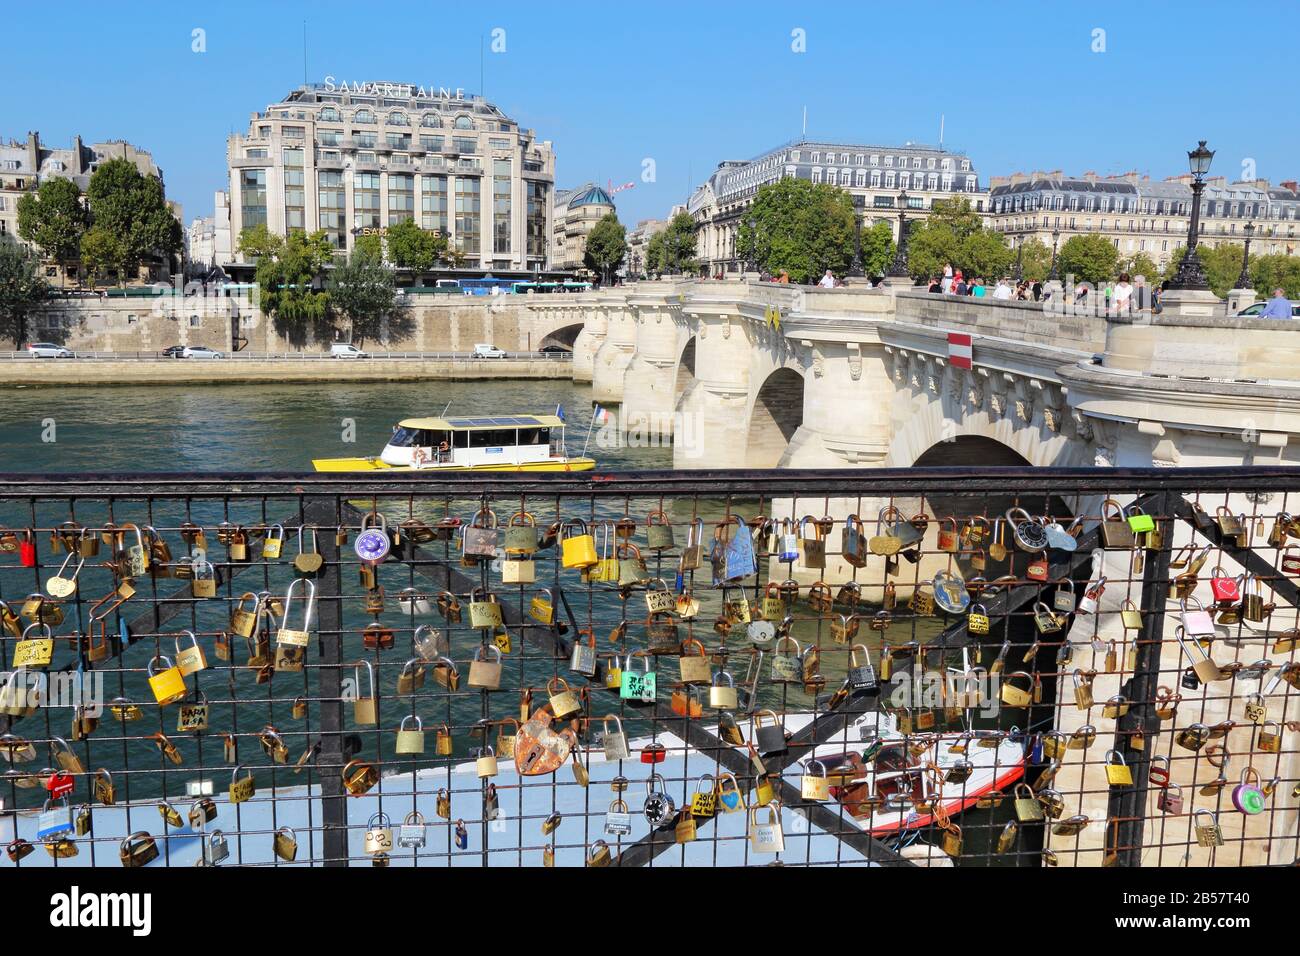 Love locks and Pont Neuf. Attaching locks to bridge railings is popular with tourists but is being discouraged to improve appearance. Stock Photo